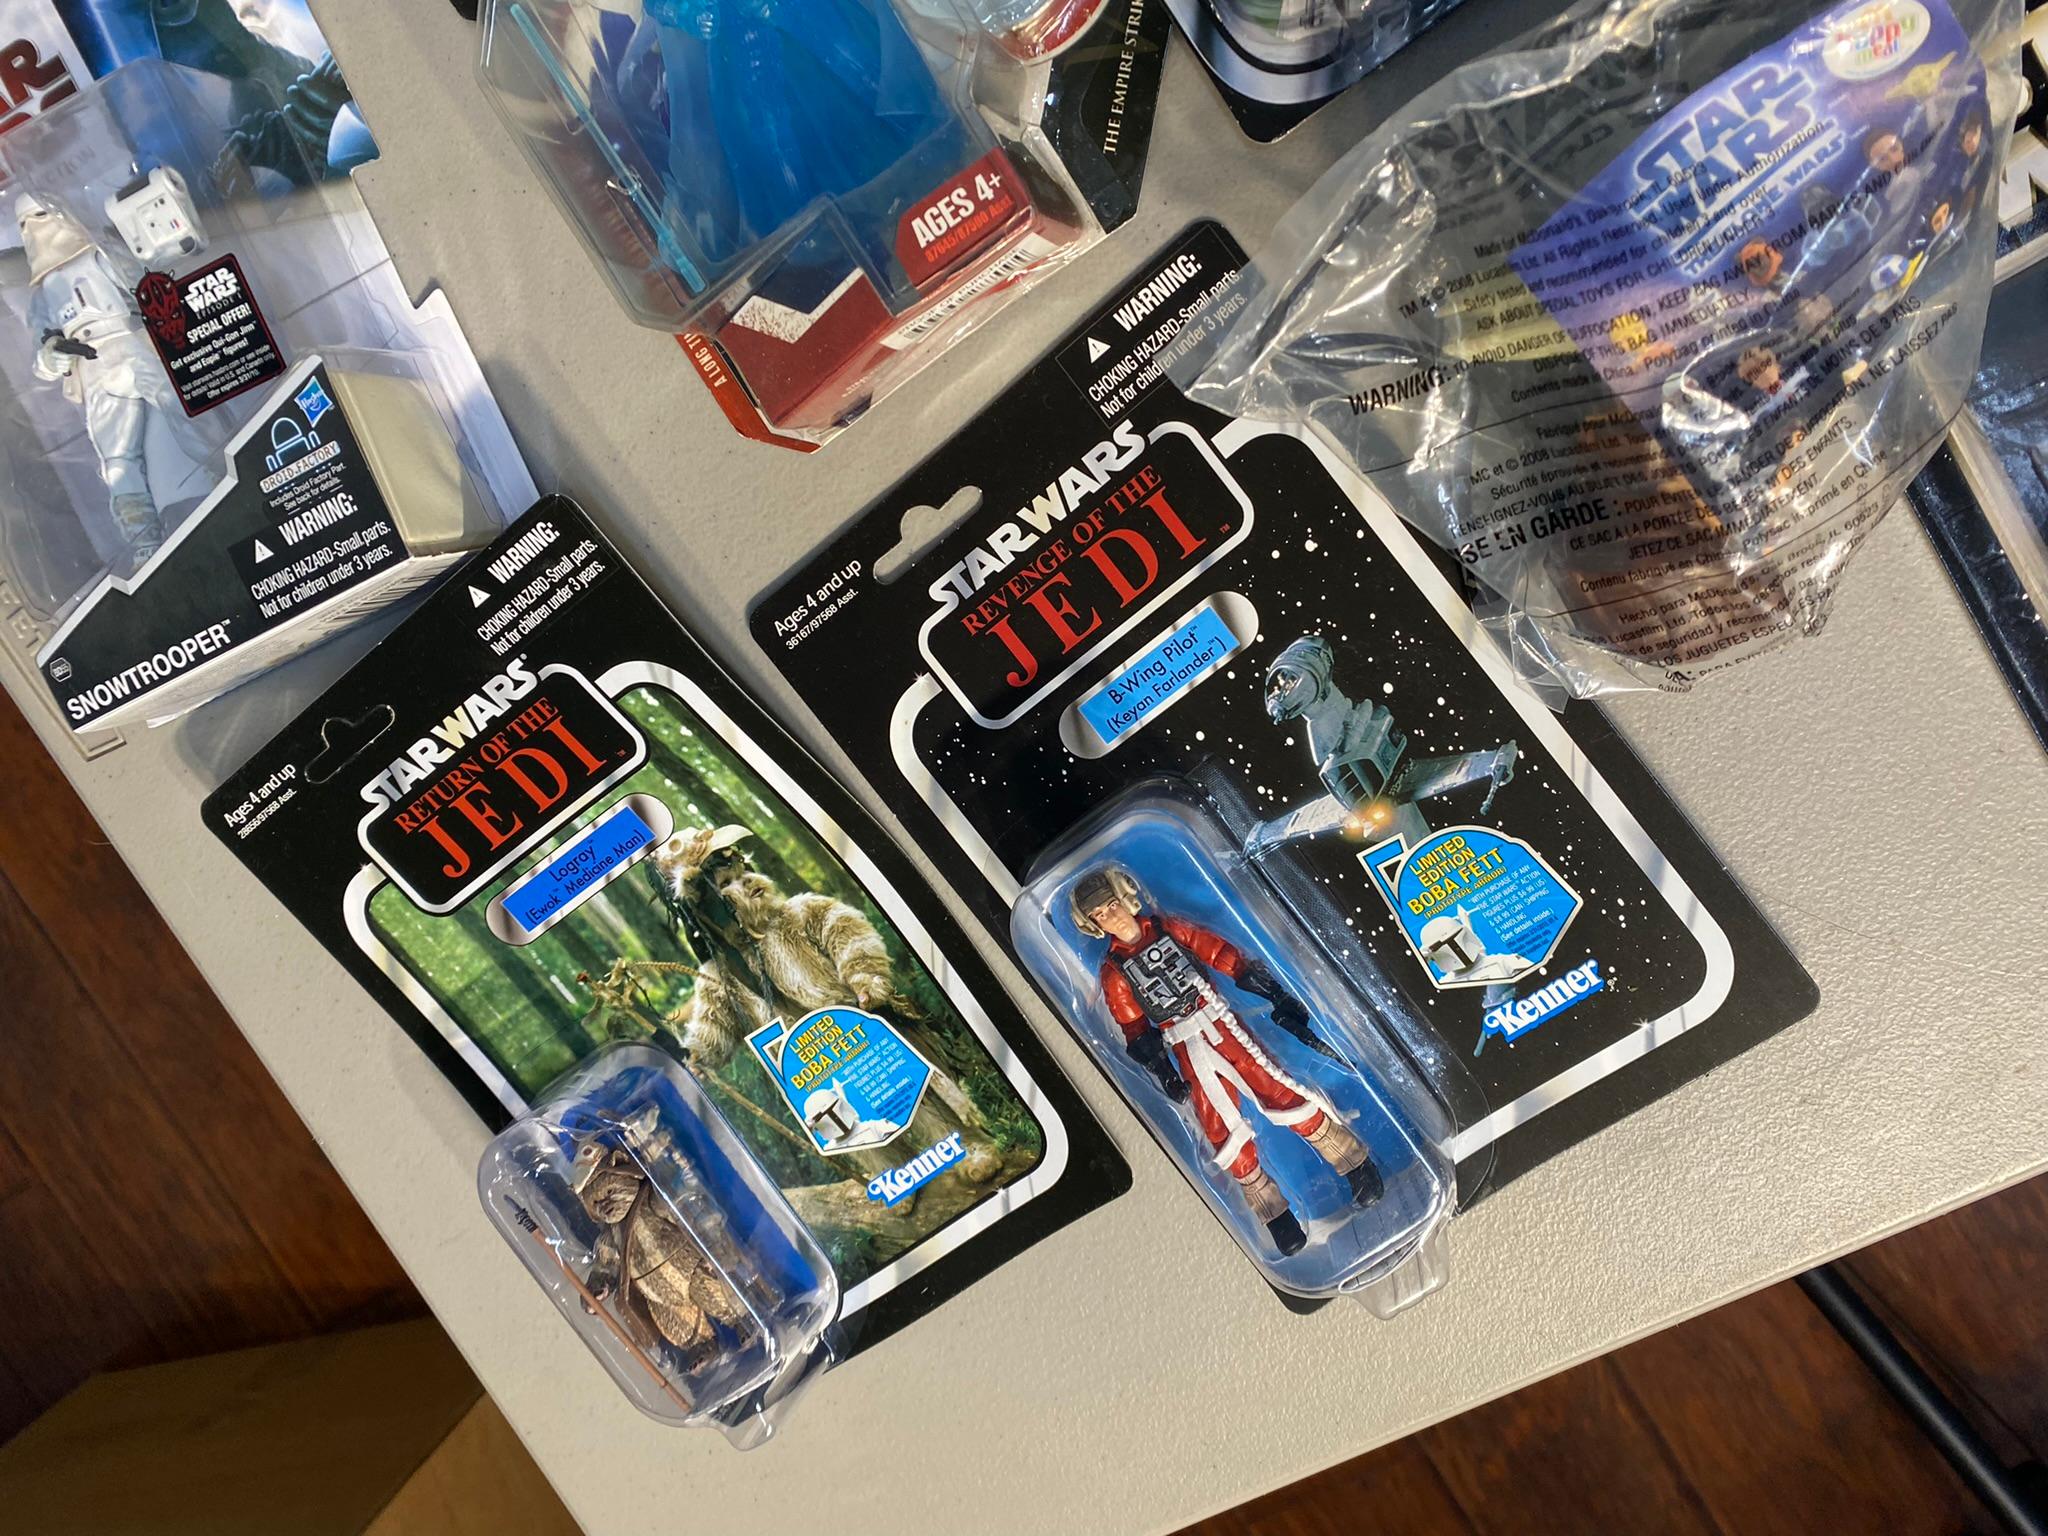 Large Lot of Star Wars Action Figures in Packaging